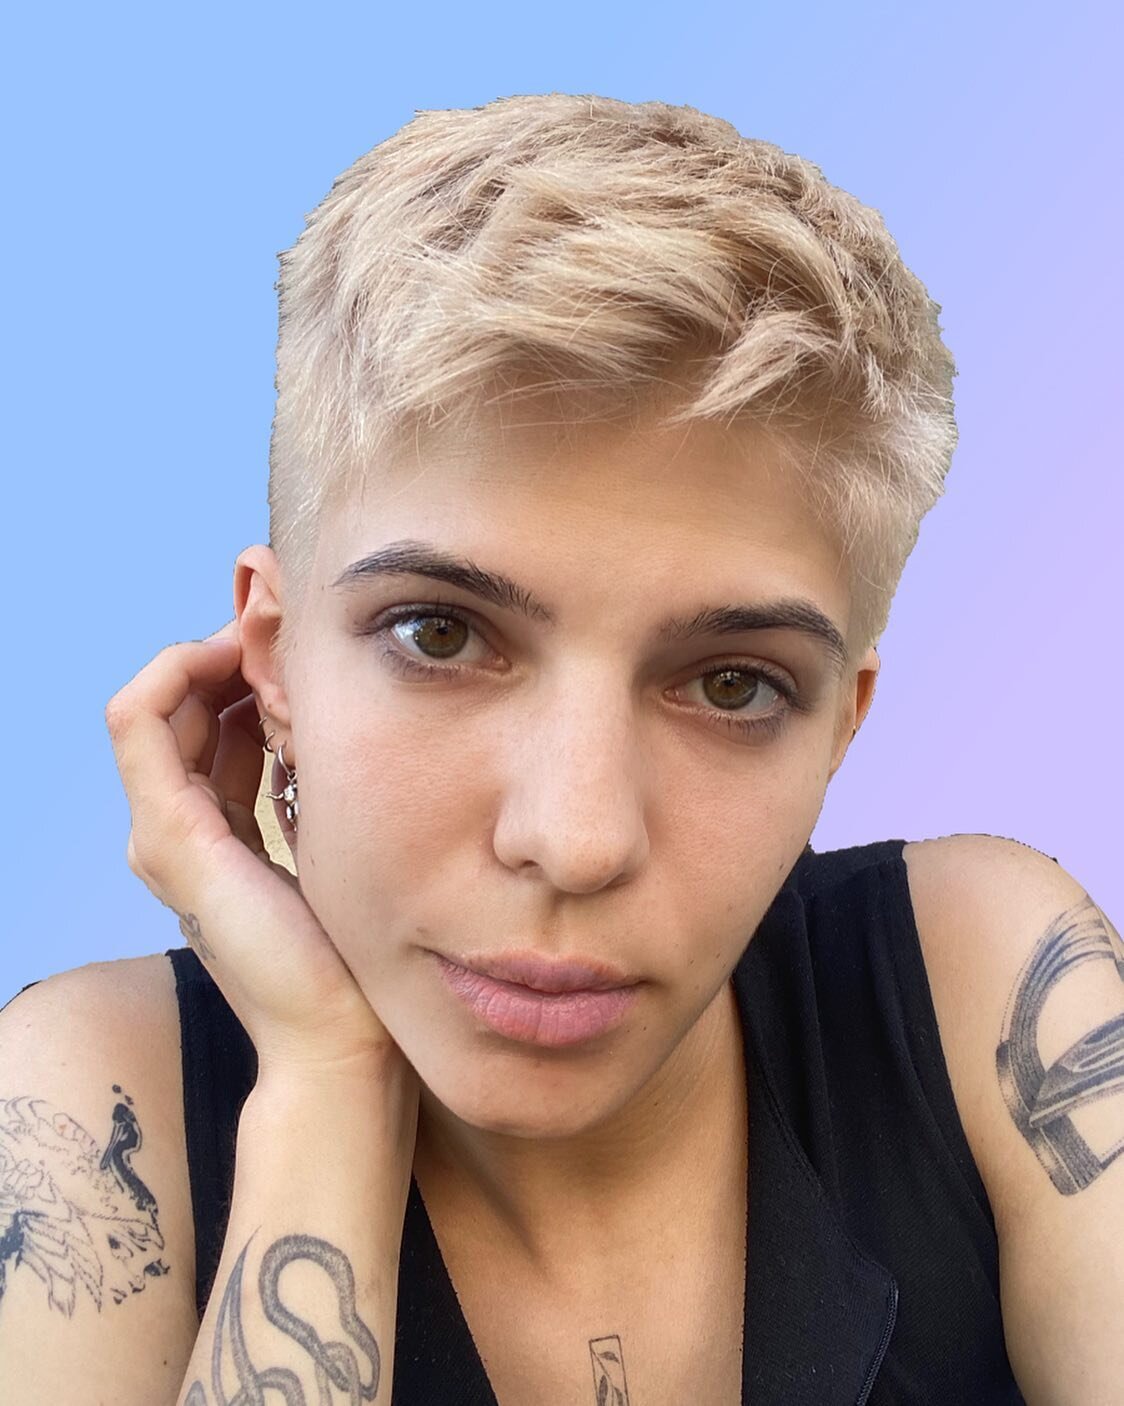 Blonde and short choppy crop for @via_savage. We&rsquo;ve done so many different colors and cuts in the past, and this one I have to say is such a great look on her. So cool to do someone&rsquo;s hair during such a transformative period in their life